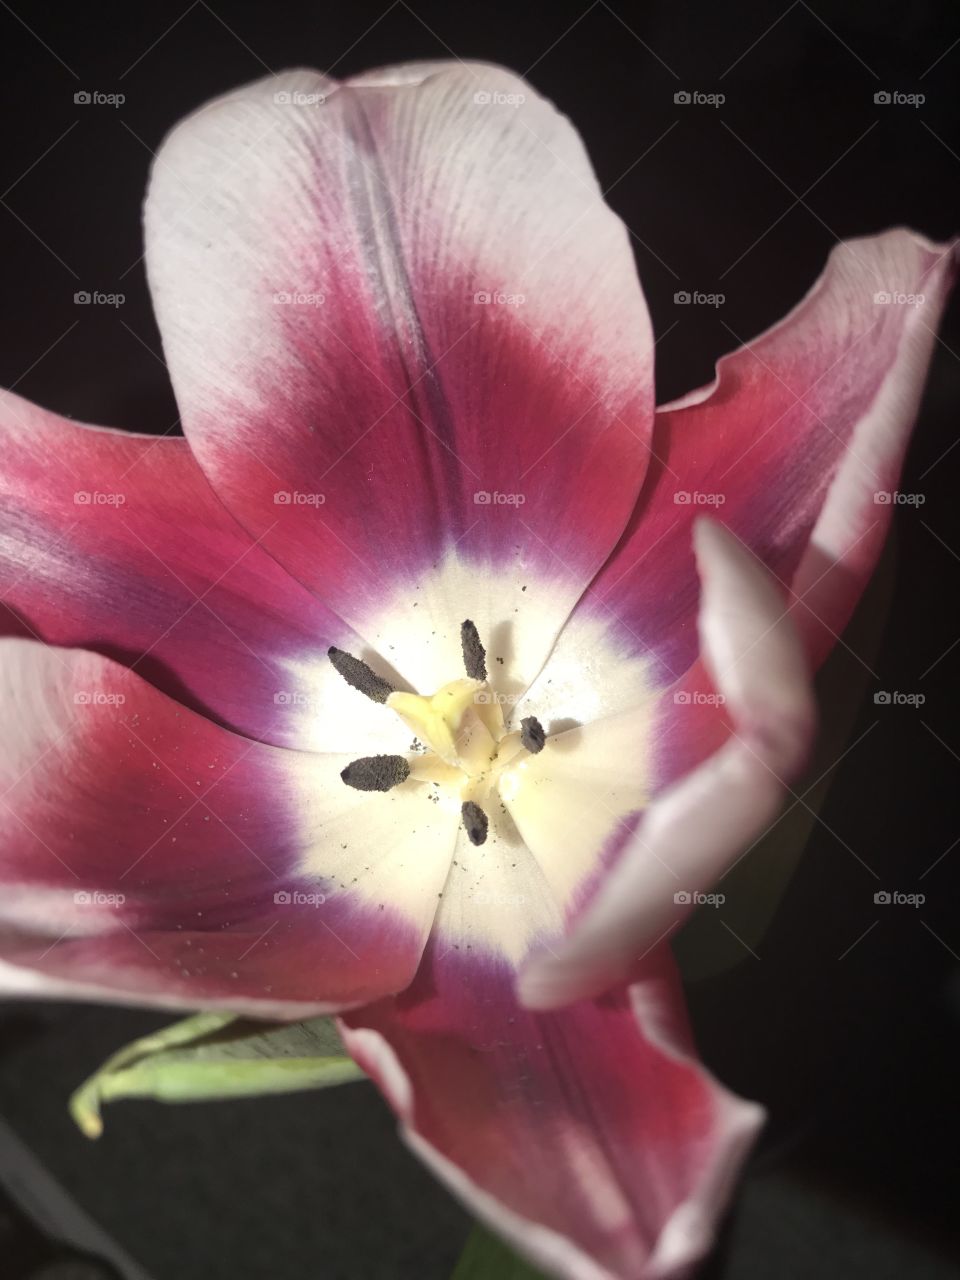 Tulip flower beauty and uniqueness ❤️